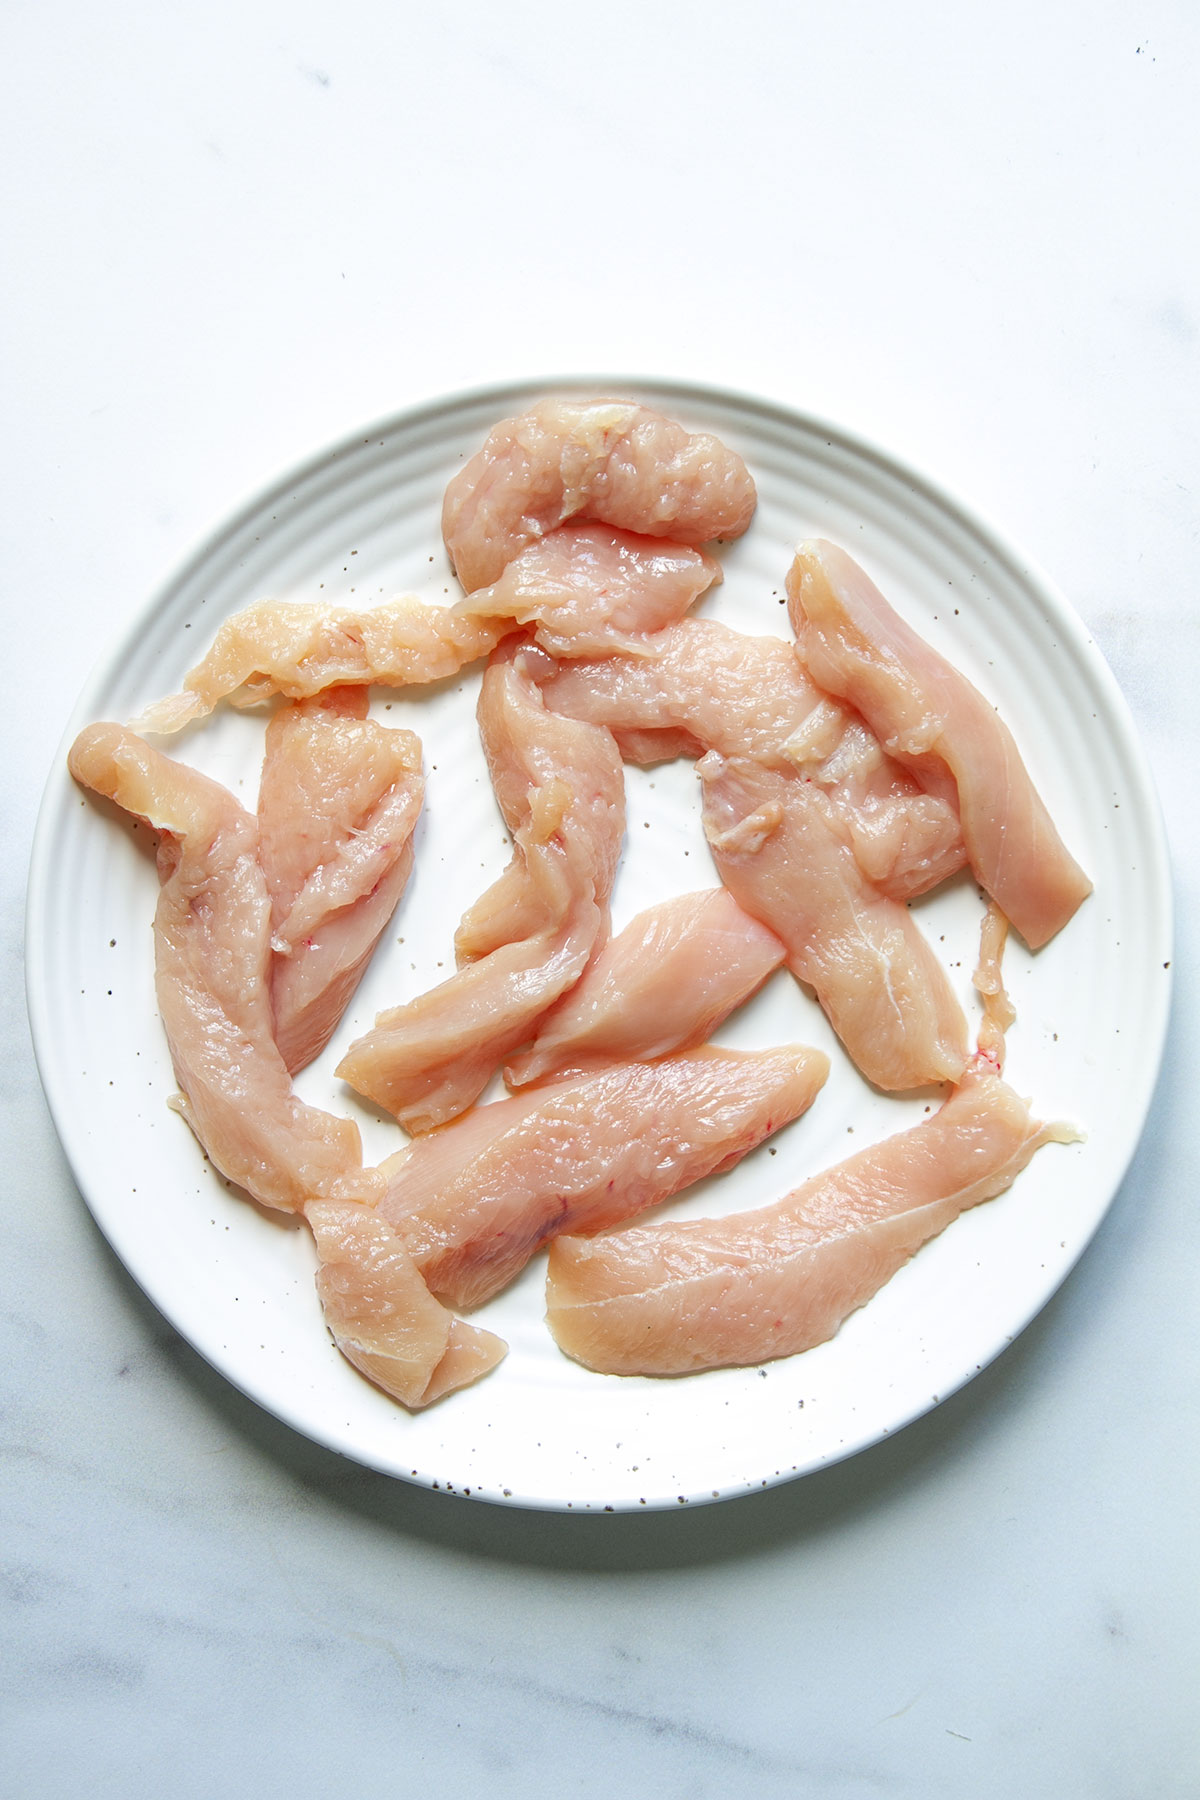 Tenderised chicken pieces on a white place.